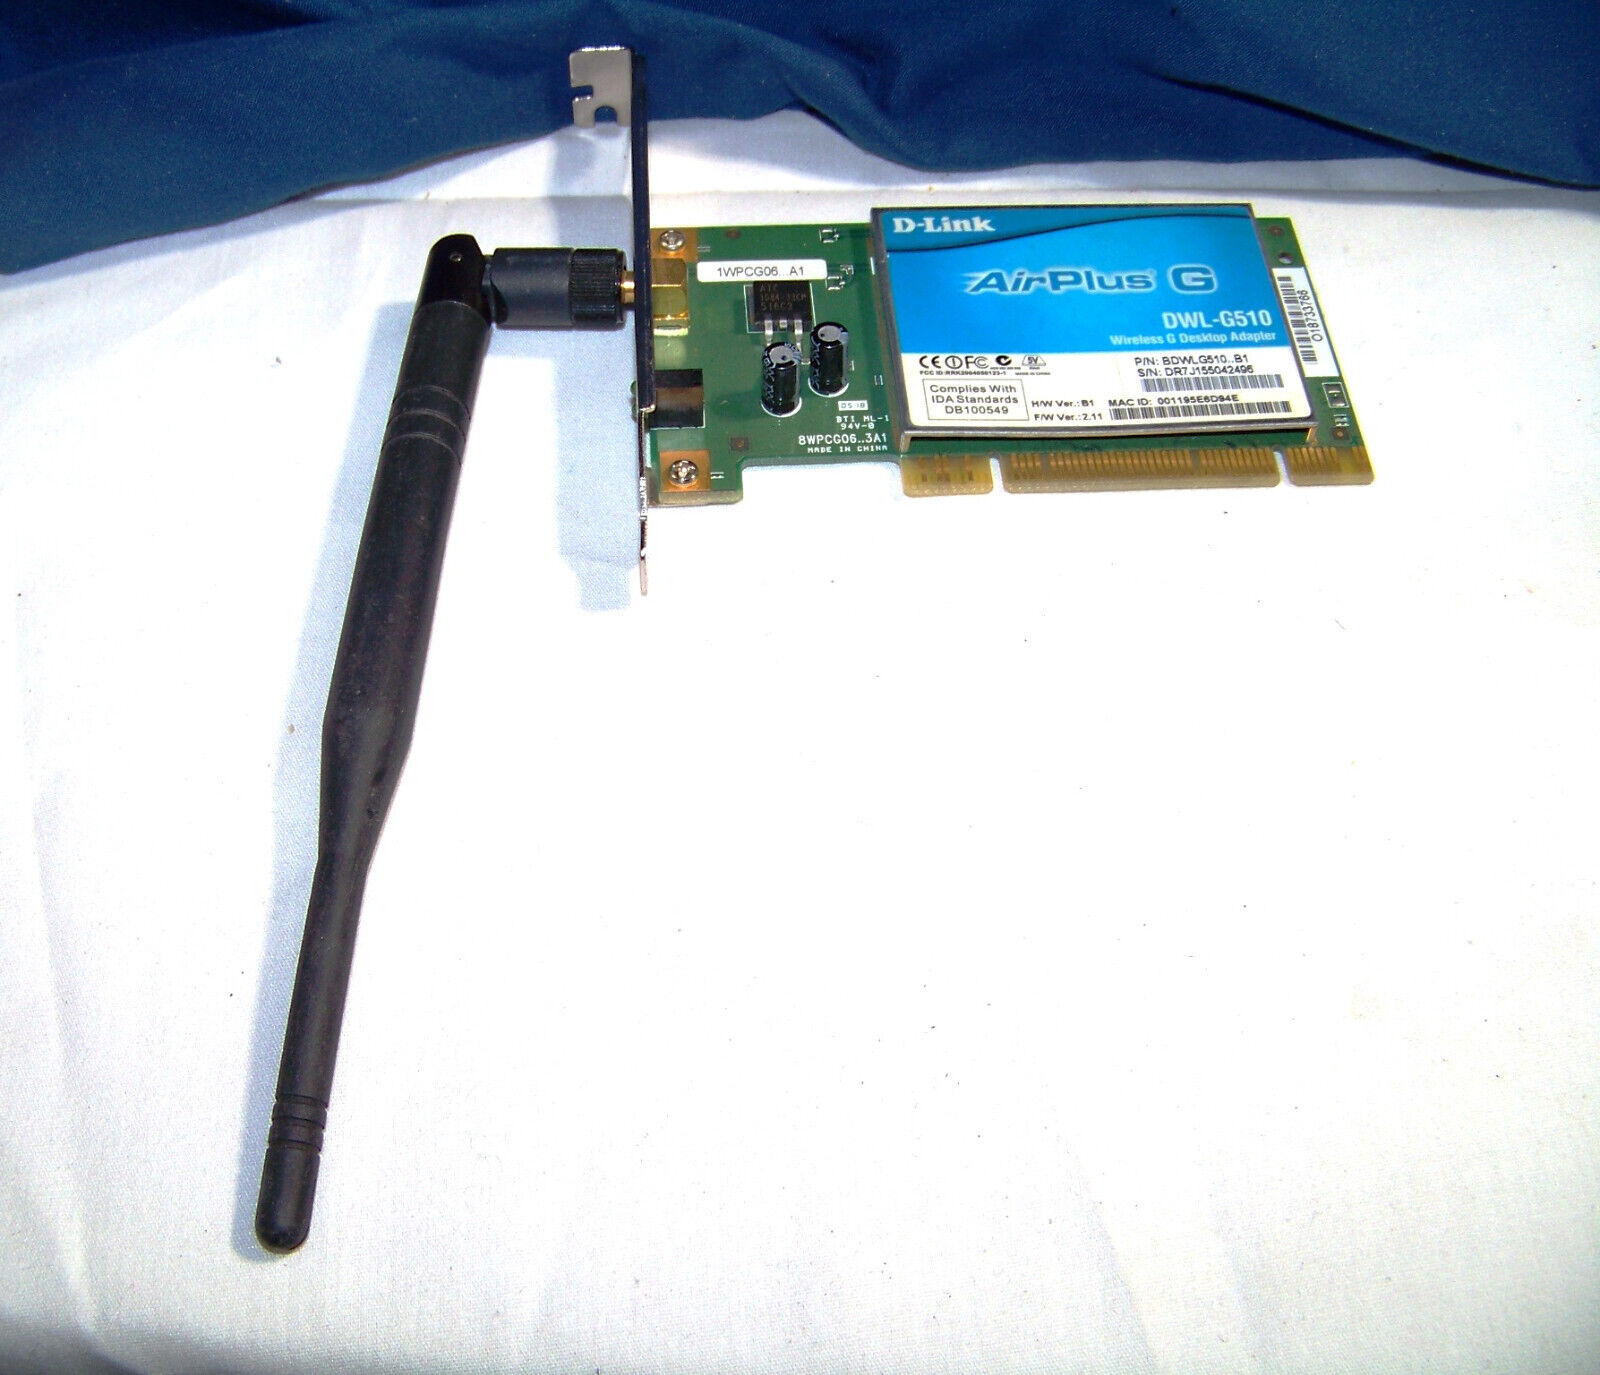 D-LINK AIRPLUS G DWL-G510 NETWORK ADAPTER - PCI - 802.11G 2.4GHz - EUC